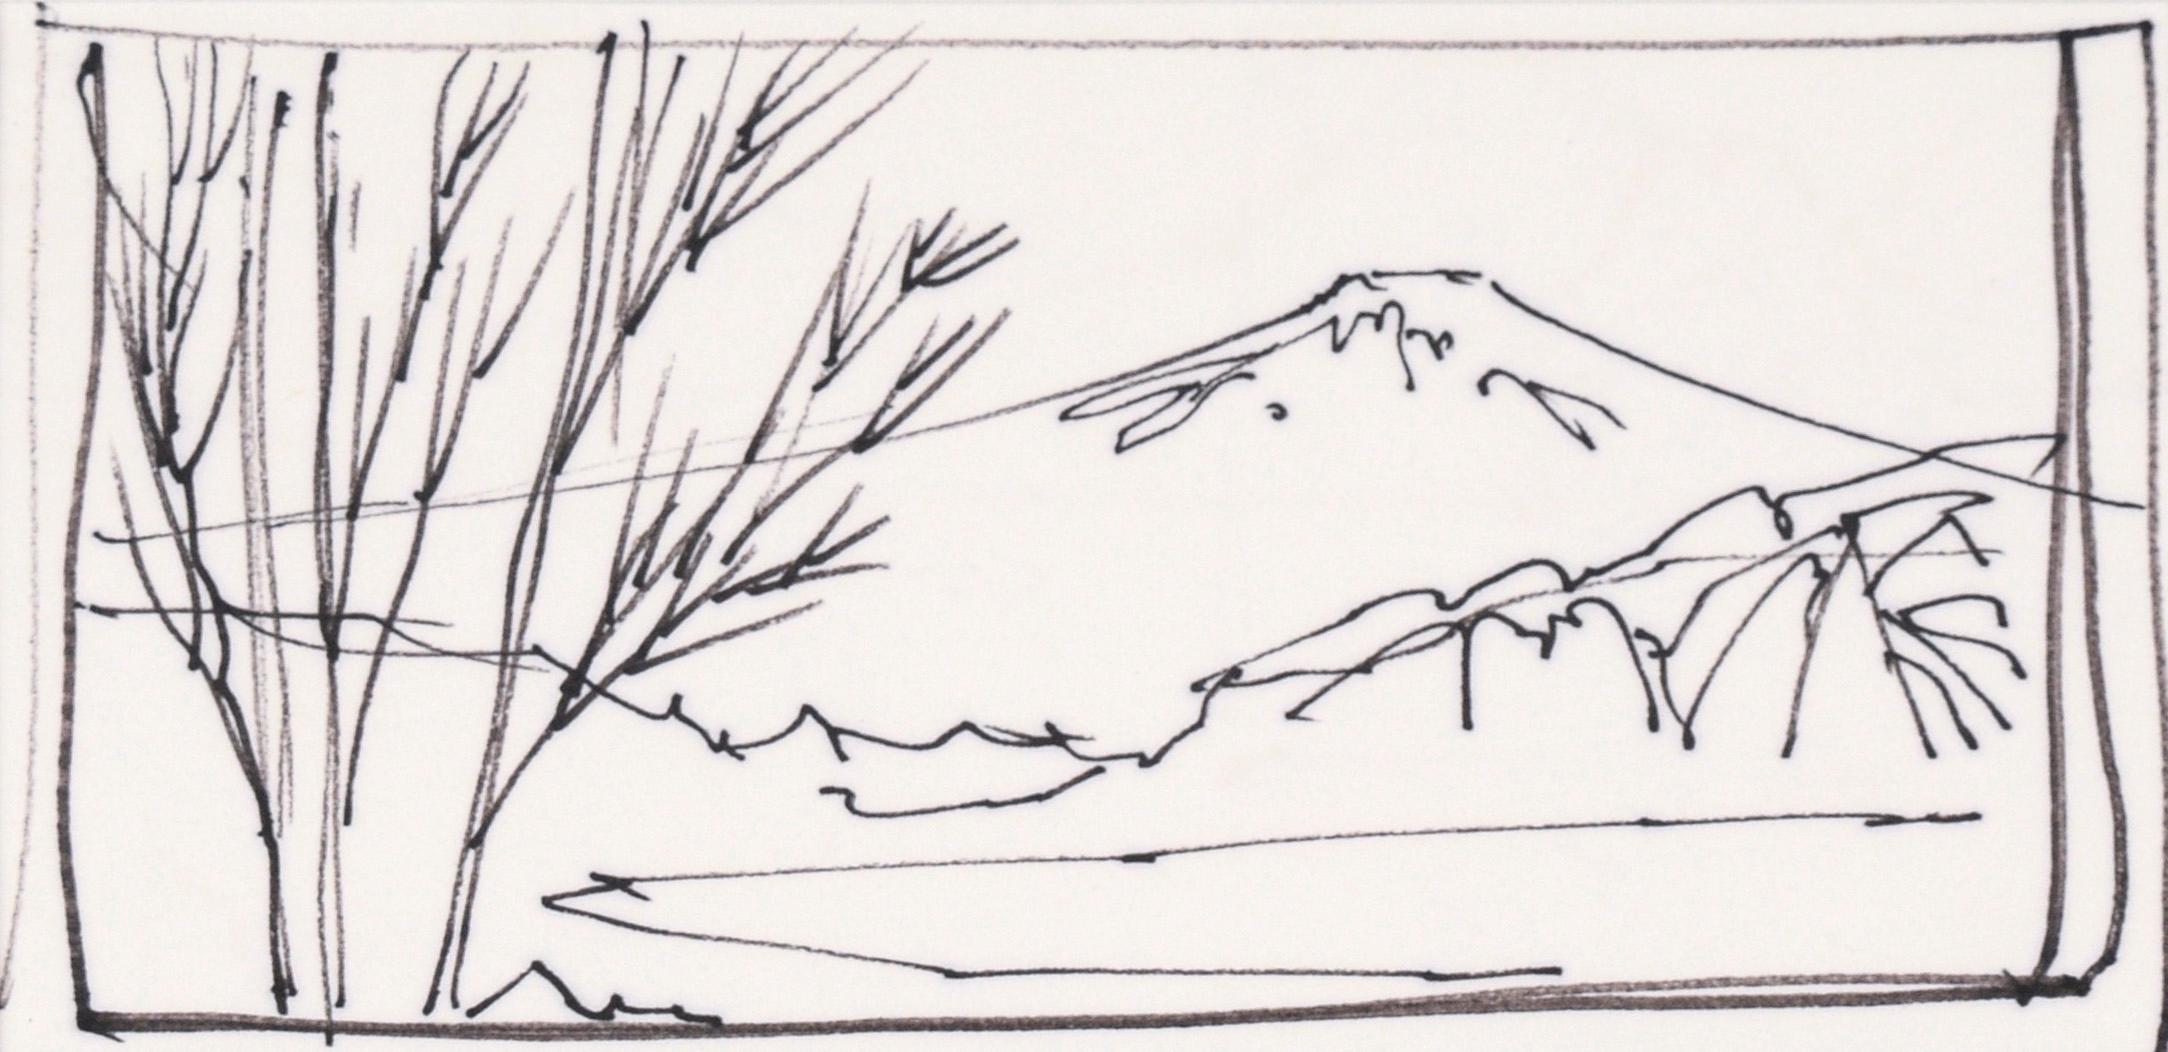 Snow-Capped Mountain Lake - Line Drawing Landscape in Ink on Paper - Art by Laurence Sisson